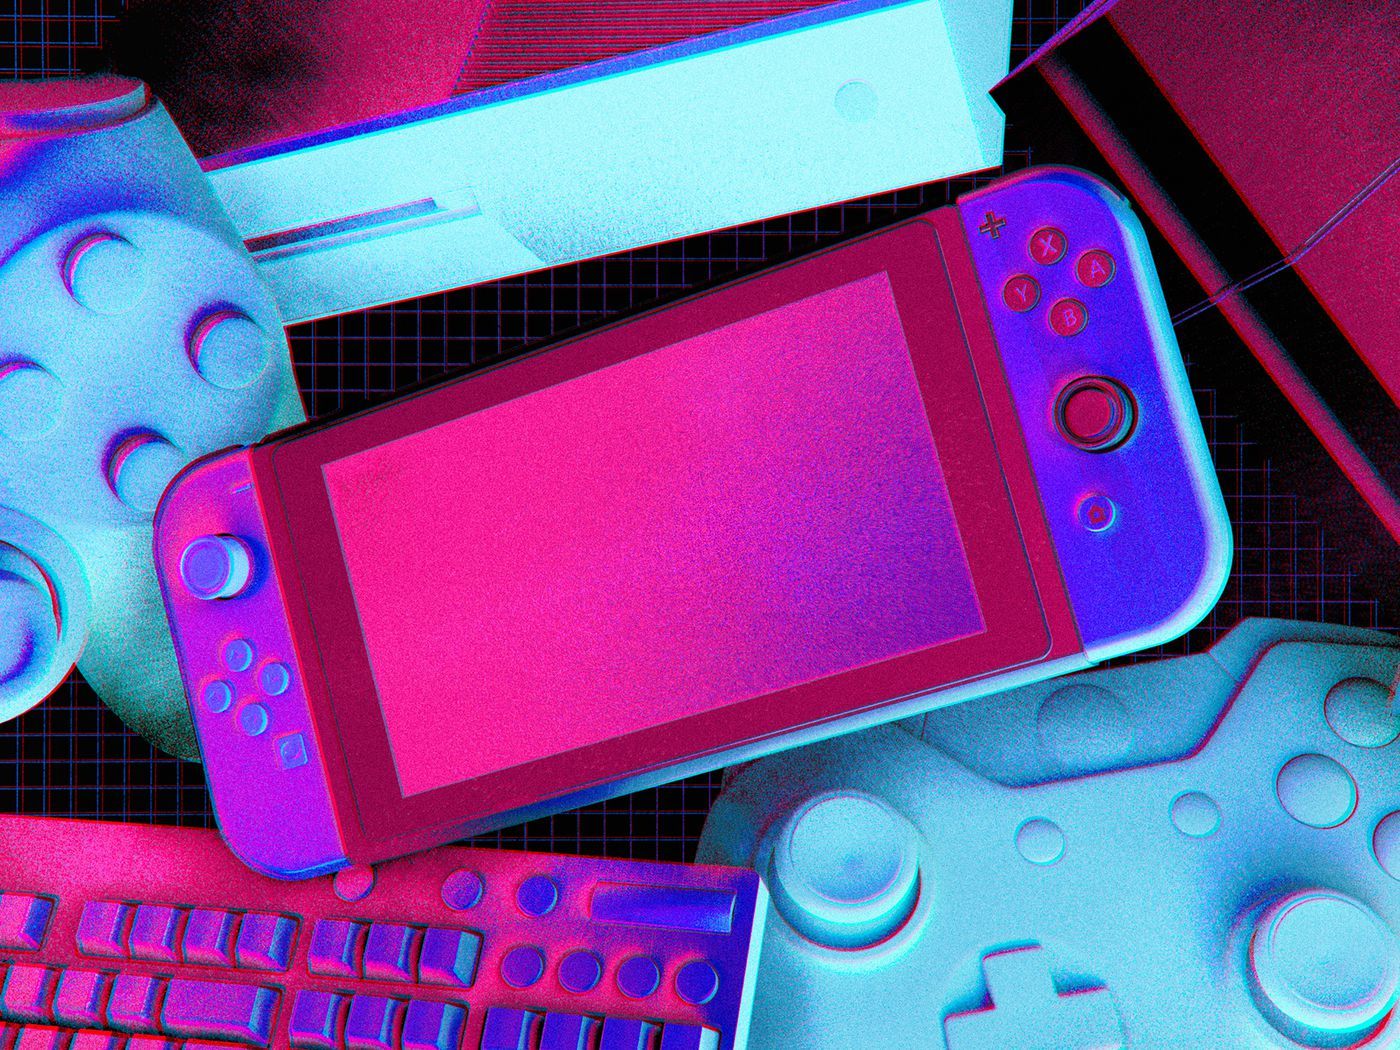 The best games of 2020: PS Xbox One, Nintendo Switch, and PC